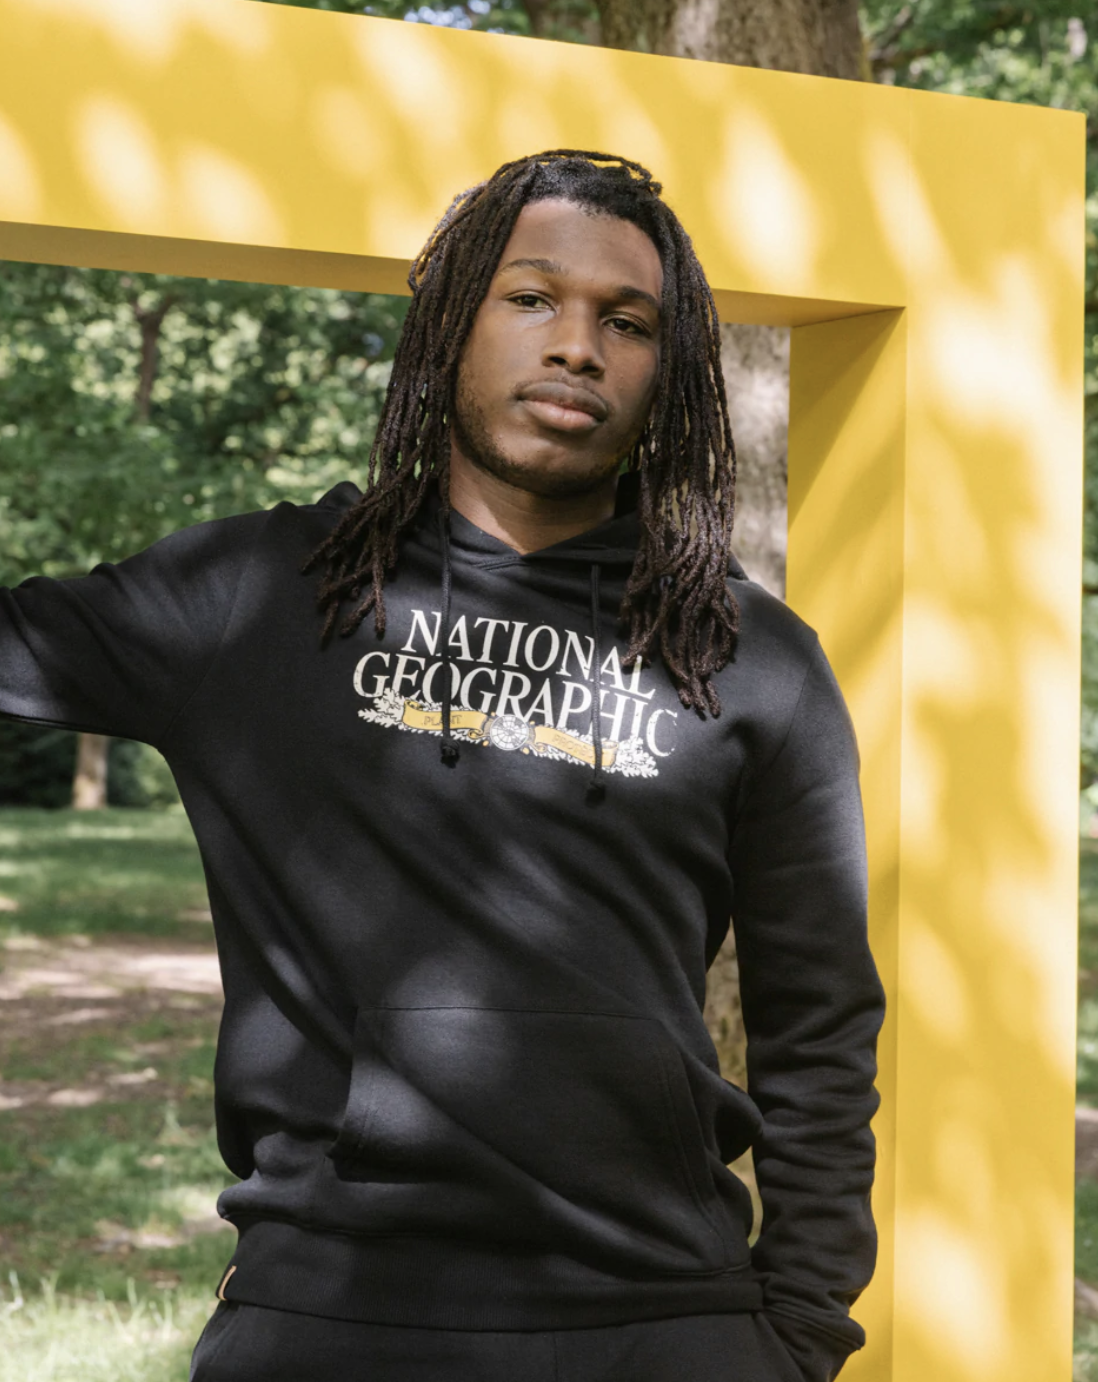 Someone leaning against a structure while wearing a National Geographic sweatshirt.